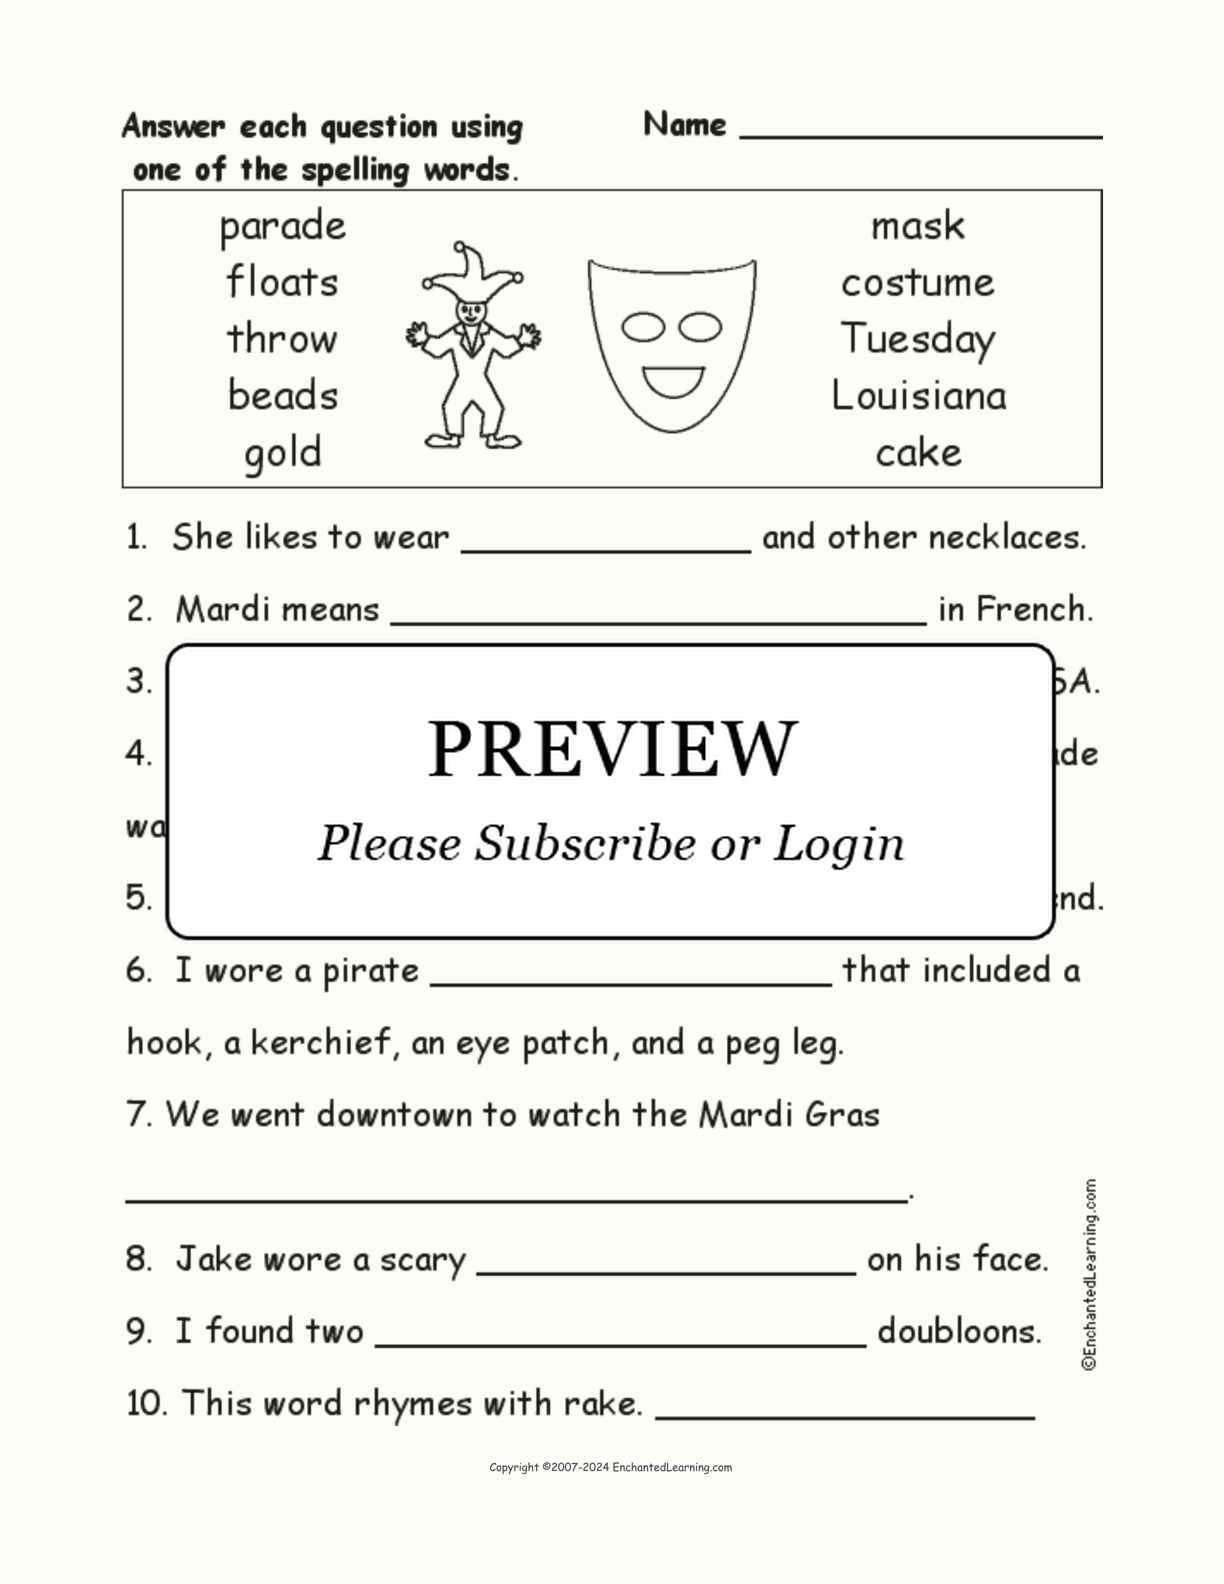 Mardi Gras Spelling Word Questions interactive worksheet page 1